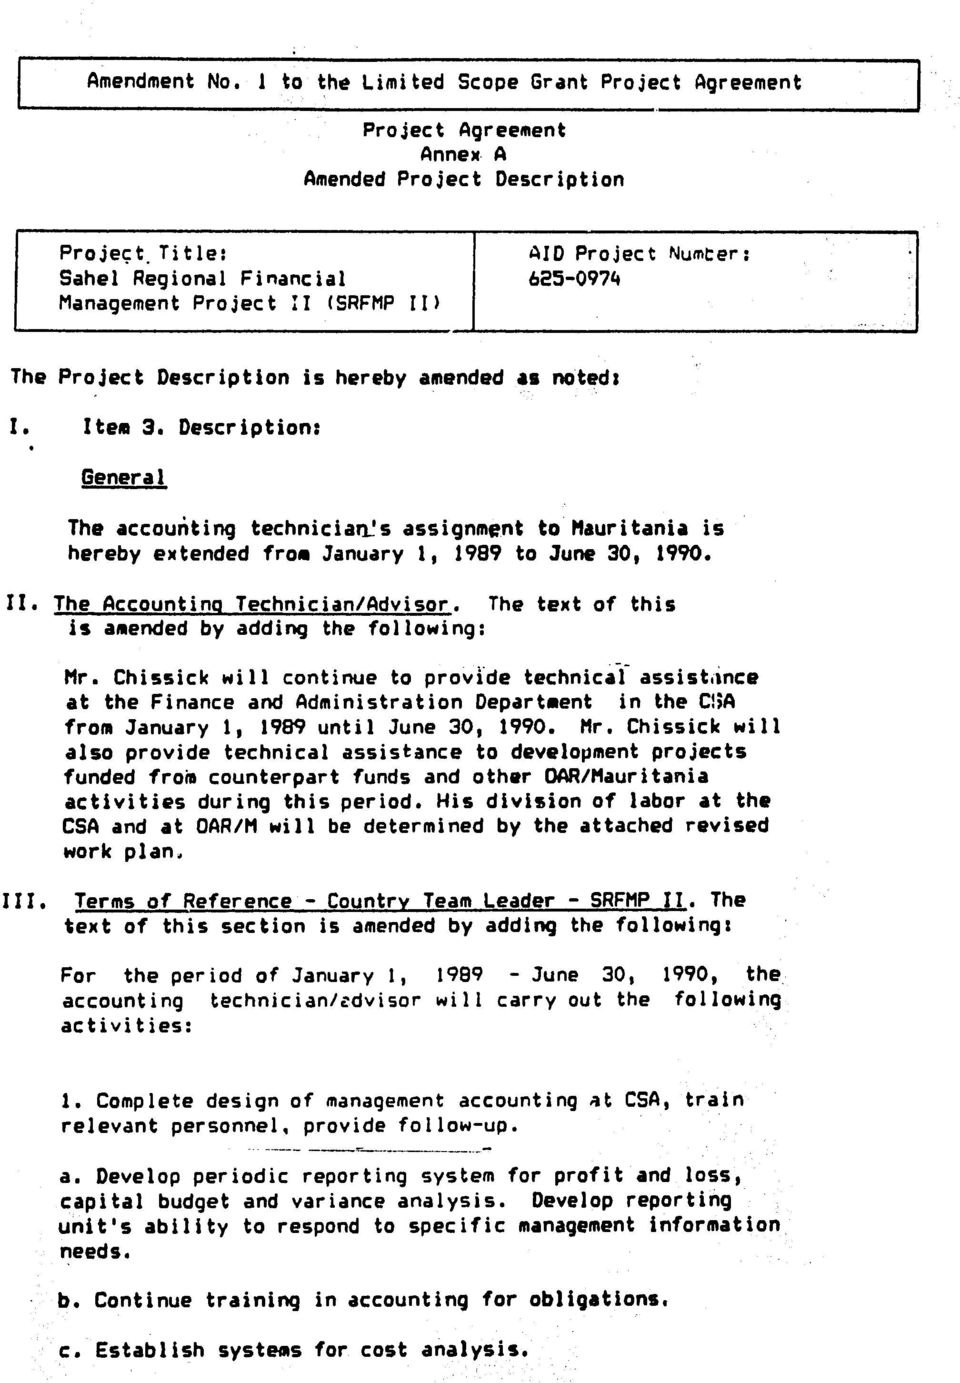 I) The Project Description is hereby amended as noted: I. Item 3. Description: General The accounting techniciar~s assignment to Mauritania is hereby extended from January 1, 1989 to June 30, 1990. I. The Accounting Technician/Advisor.